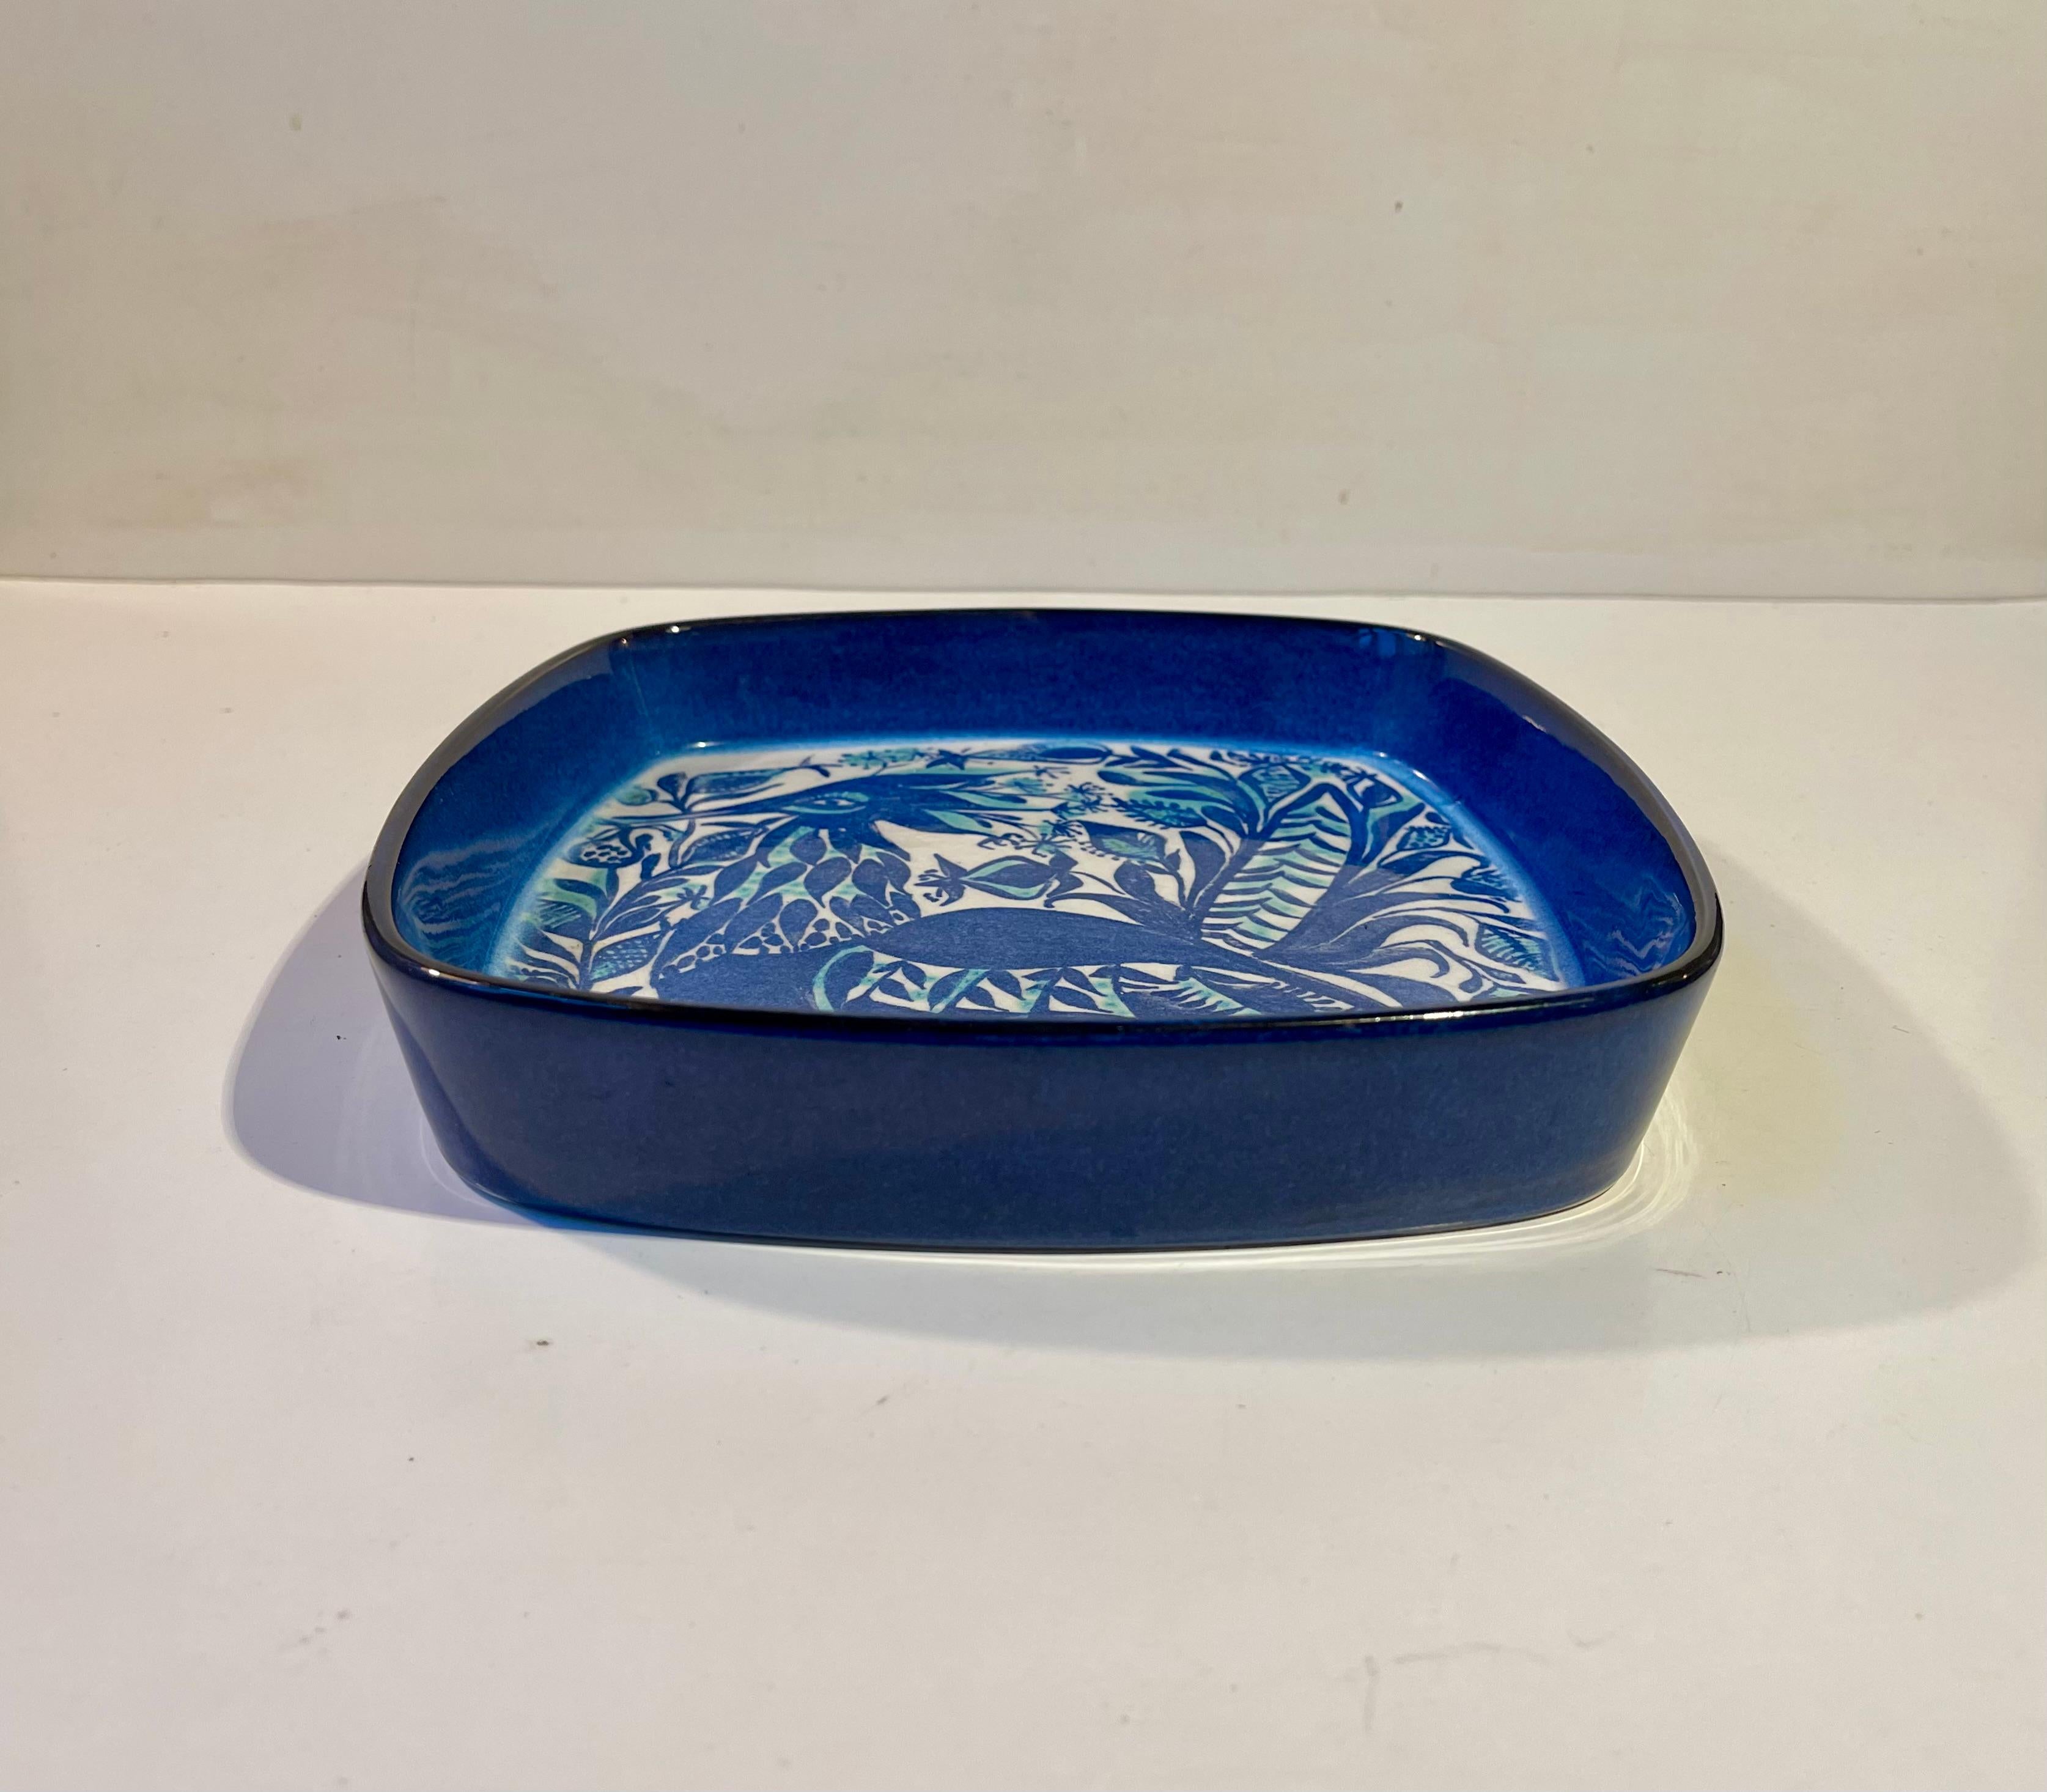 Aluminia Denmark Art Faience bowl designed by Marianne Johnson. A series of artist faience initiated by Nils Thorsson. Its. Ddecorated with a blue fantasy bird. Model number 143/2884.Its fully marked to the base with designer initials and makers